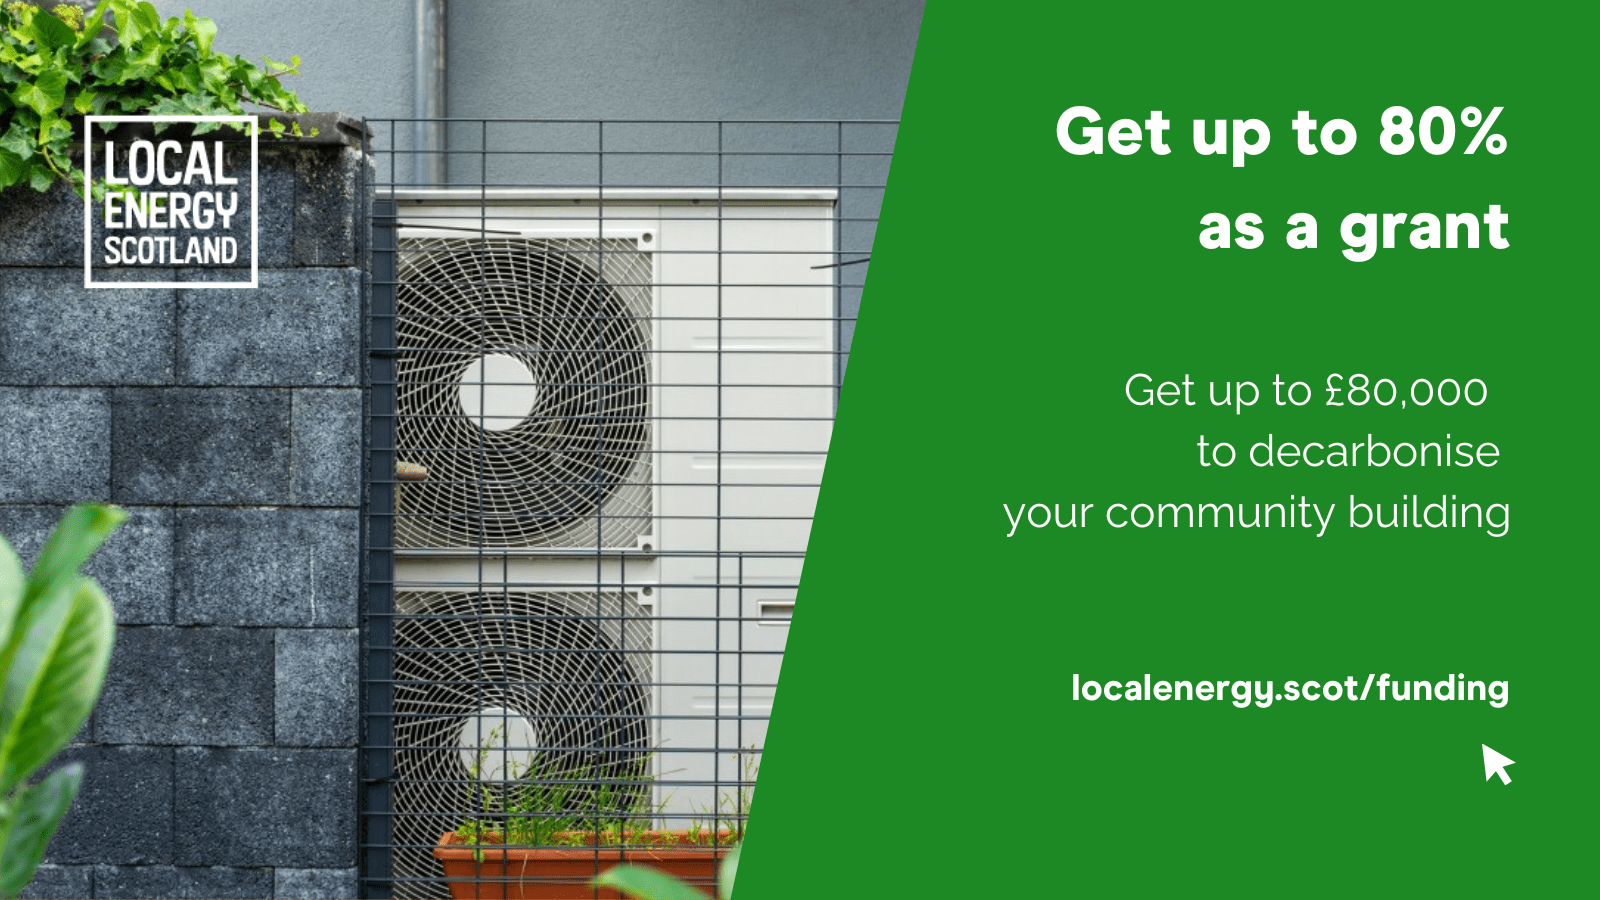 Get up to 80% as a grant. Get up to £80,000 to decarbonise your community building